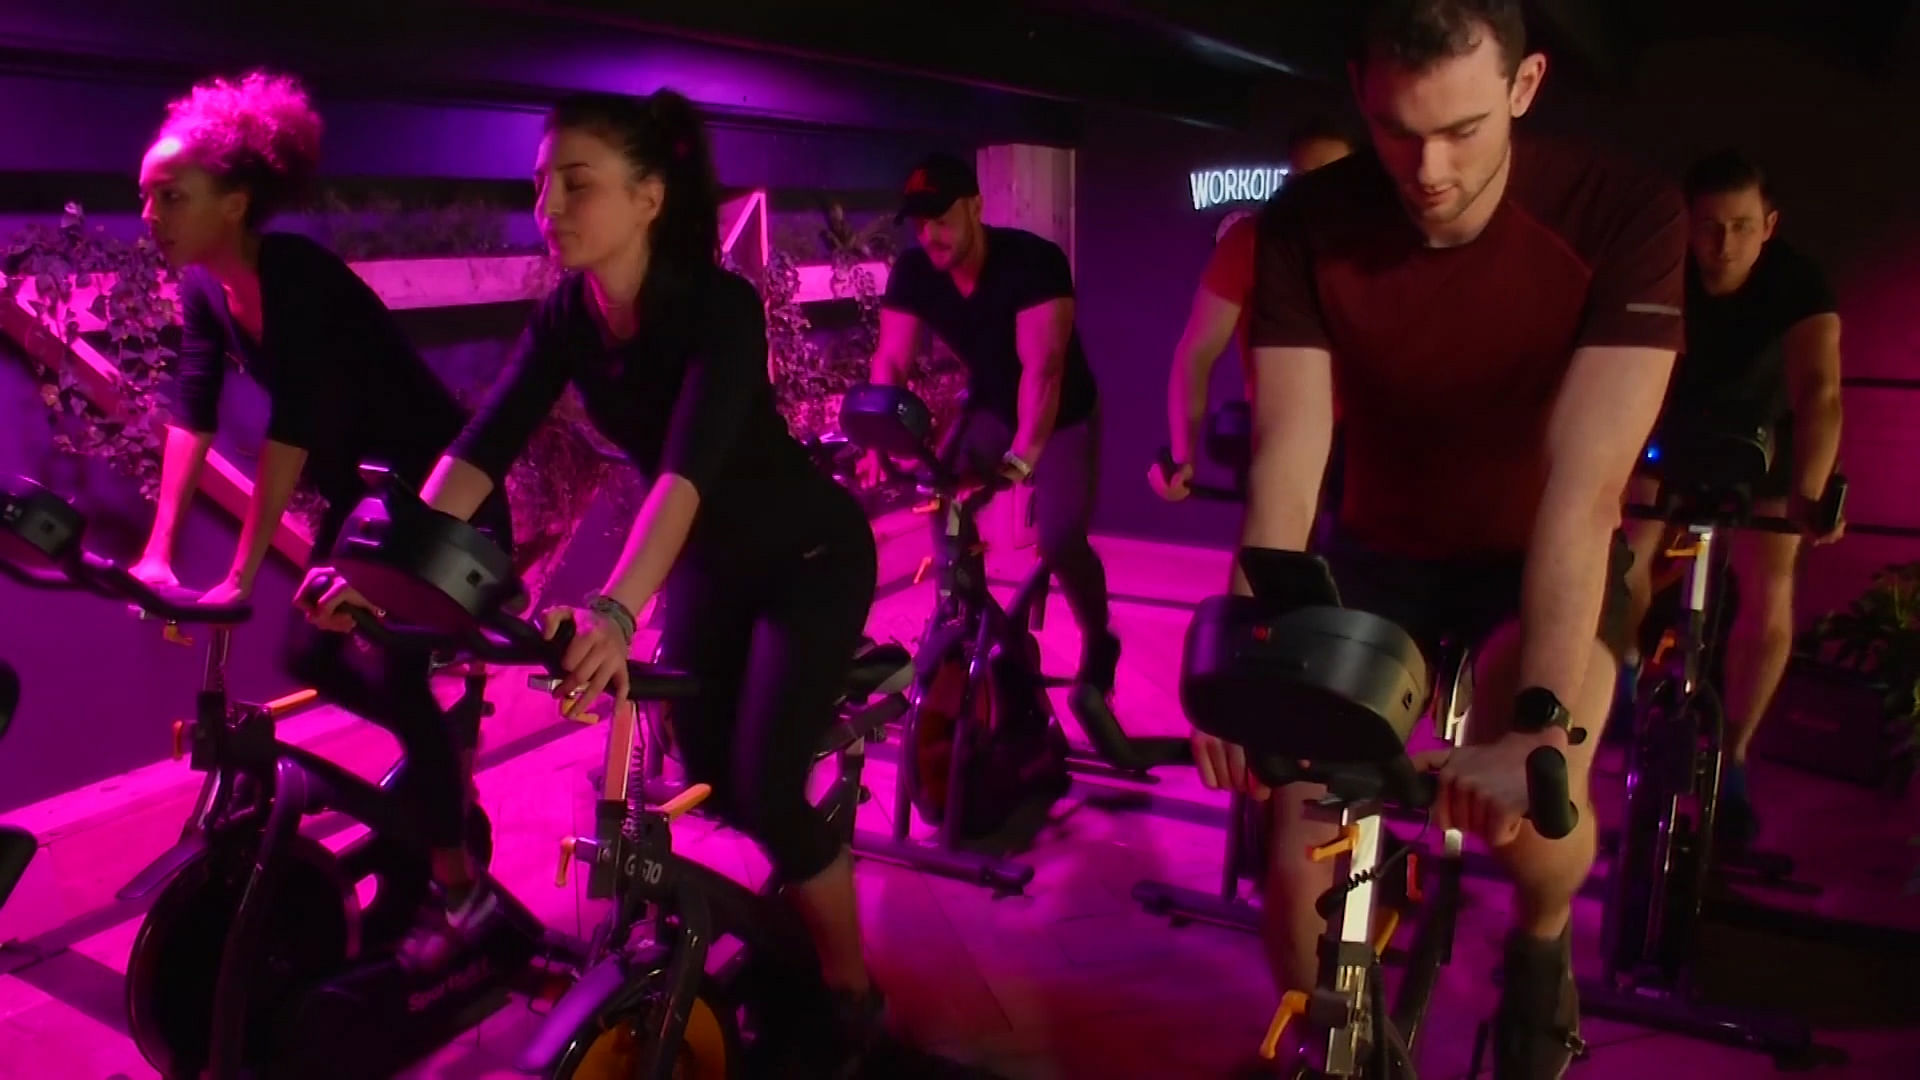 The gym’s spin bikes are built to harness peddle power, generating energy that’ll be put back into the local grid.